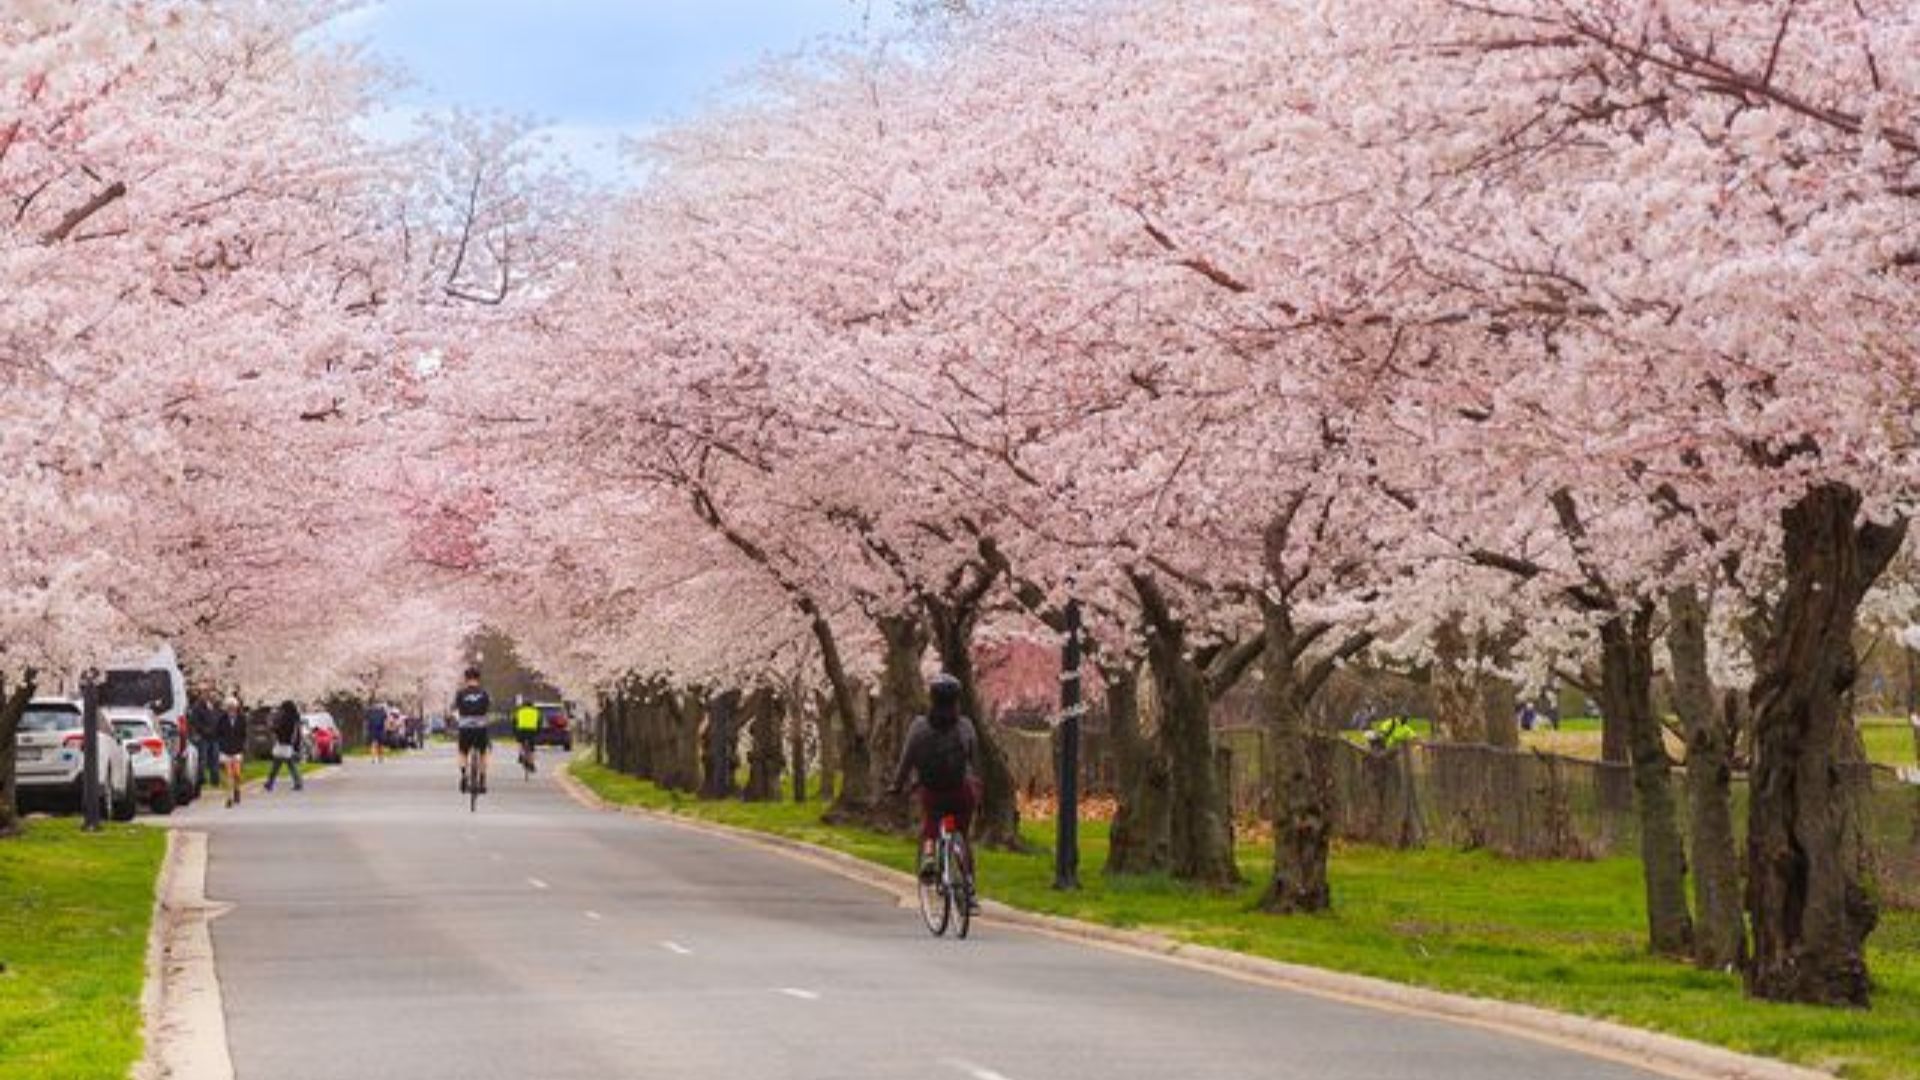 This Is When Cherry Blossoms In Washington DC Will Peak